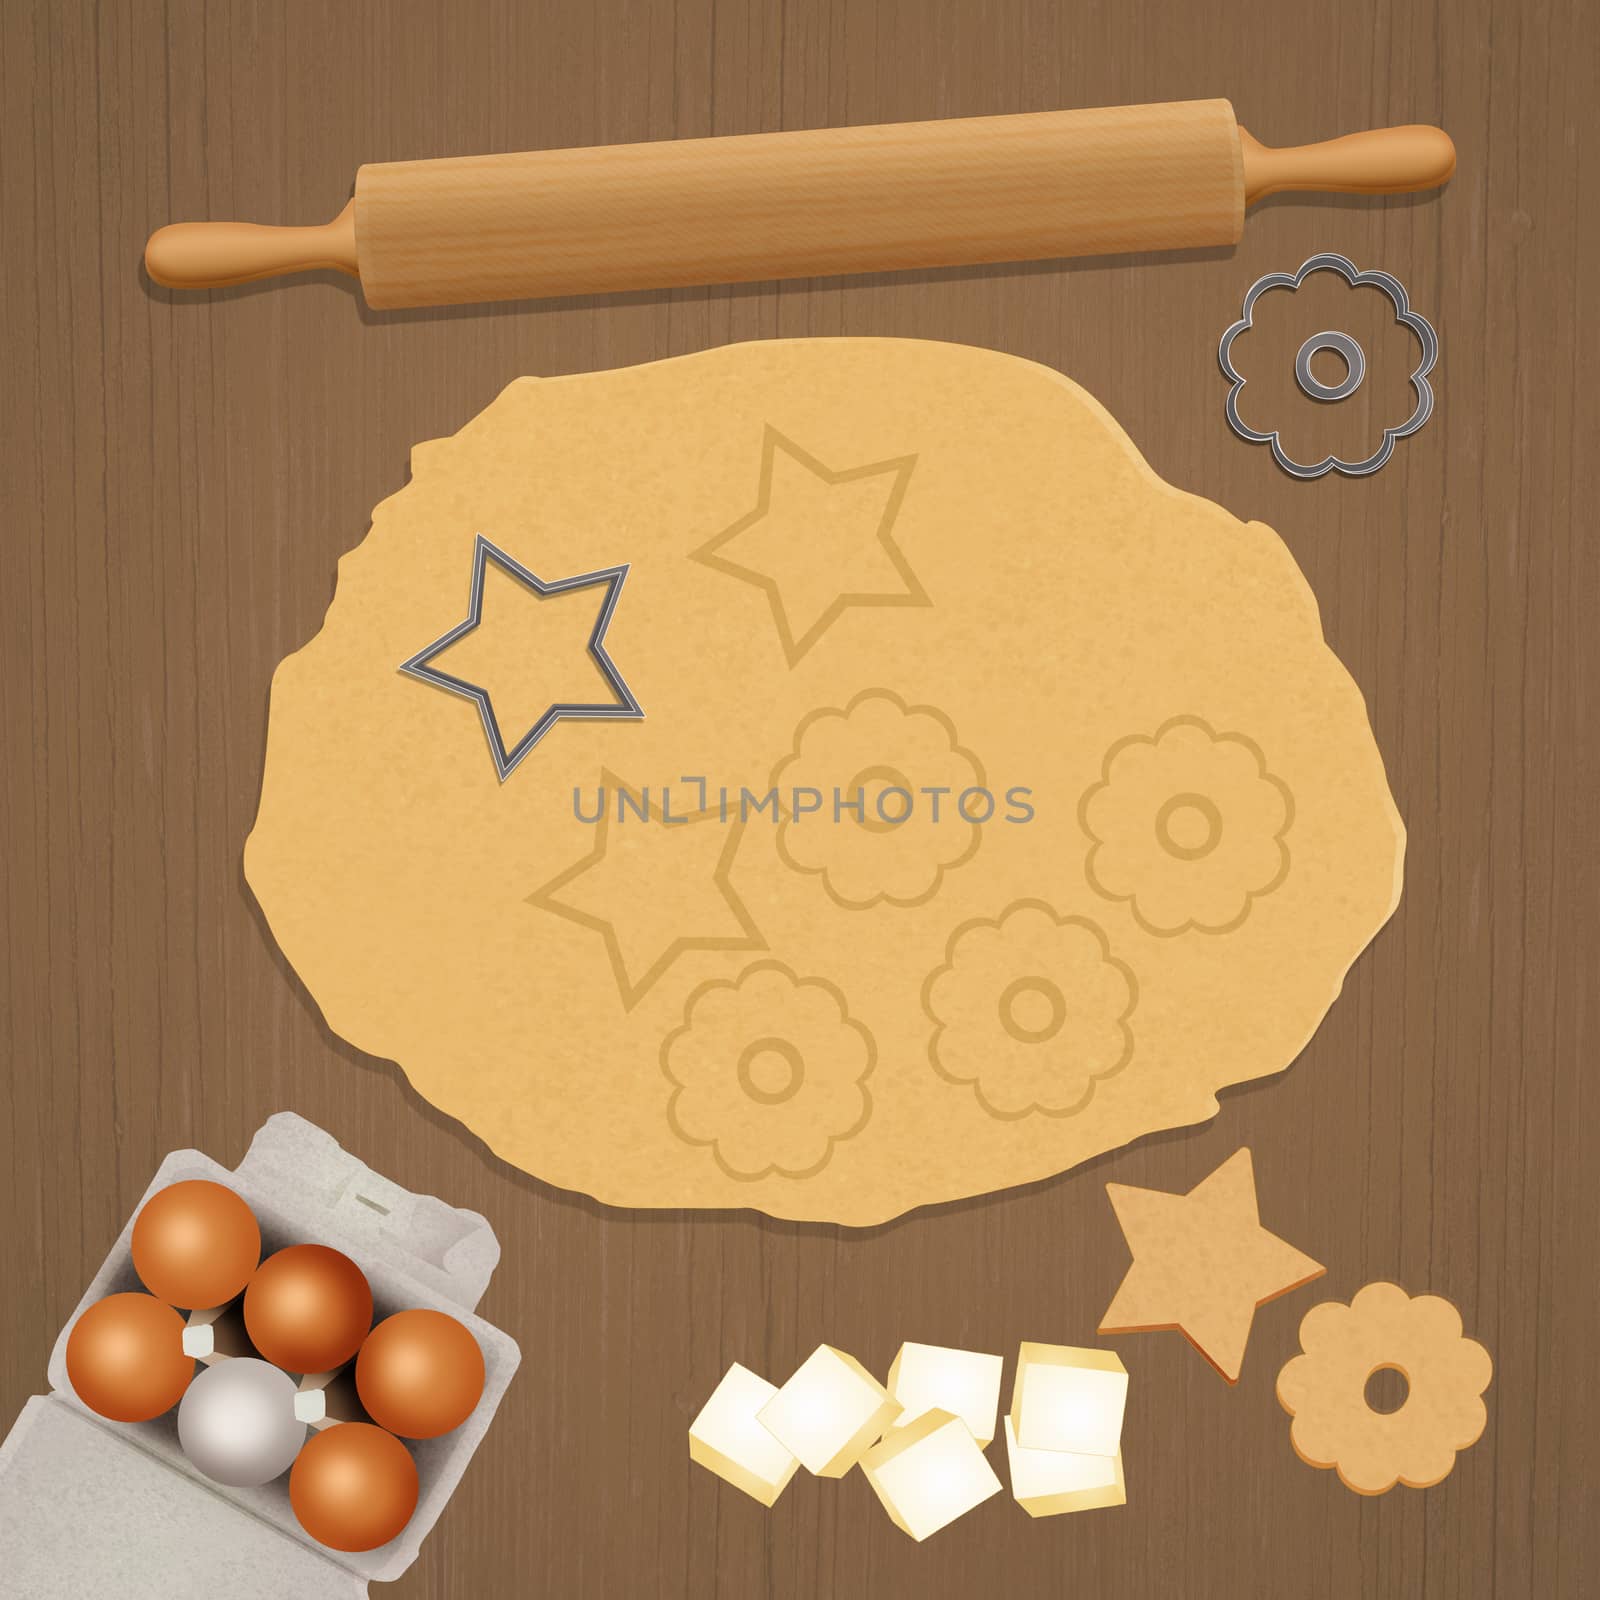 illustration of shortbread biscuits by adrenalina